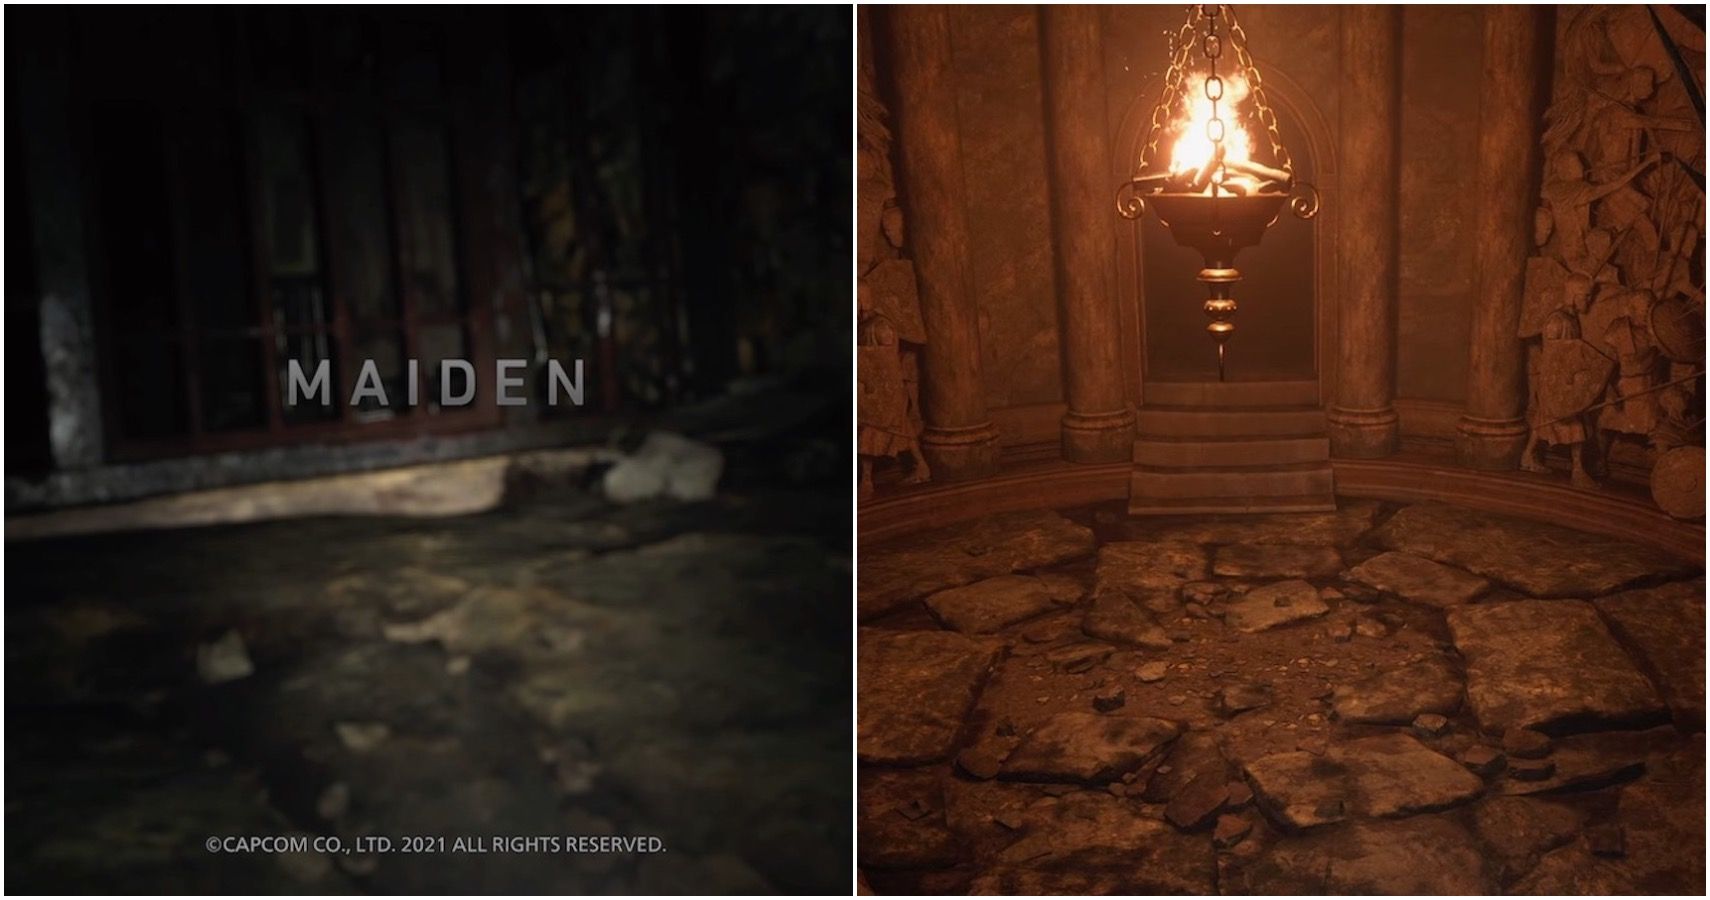 A Step By Step Guide Through Maiden The PS5 Exclusive Resident Evil Village Demo